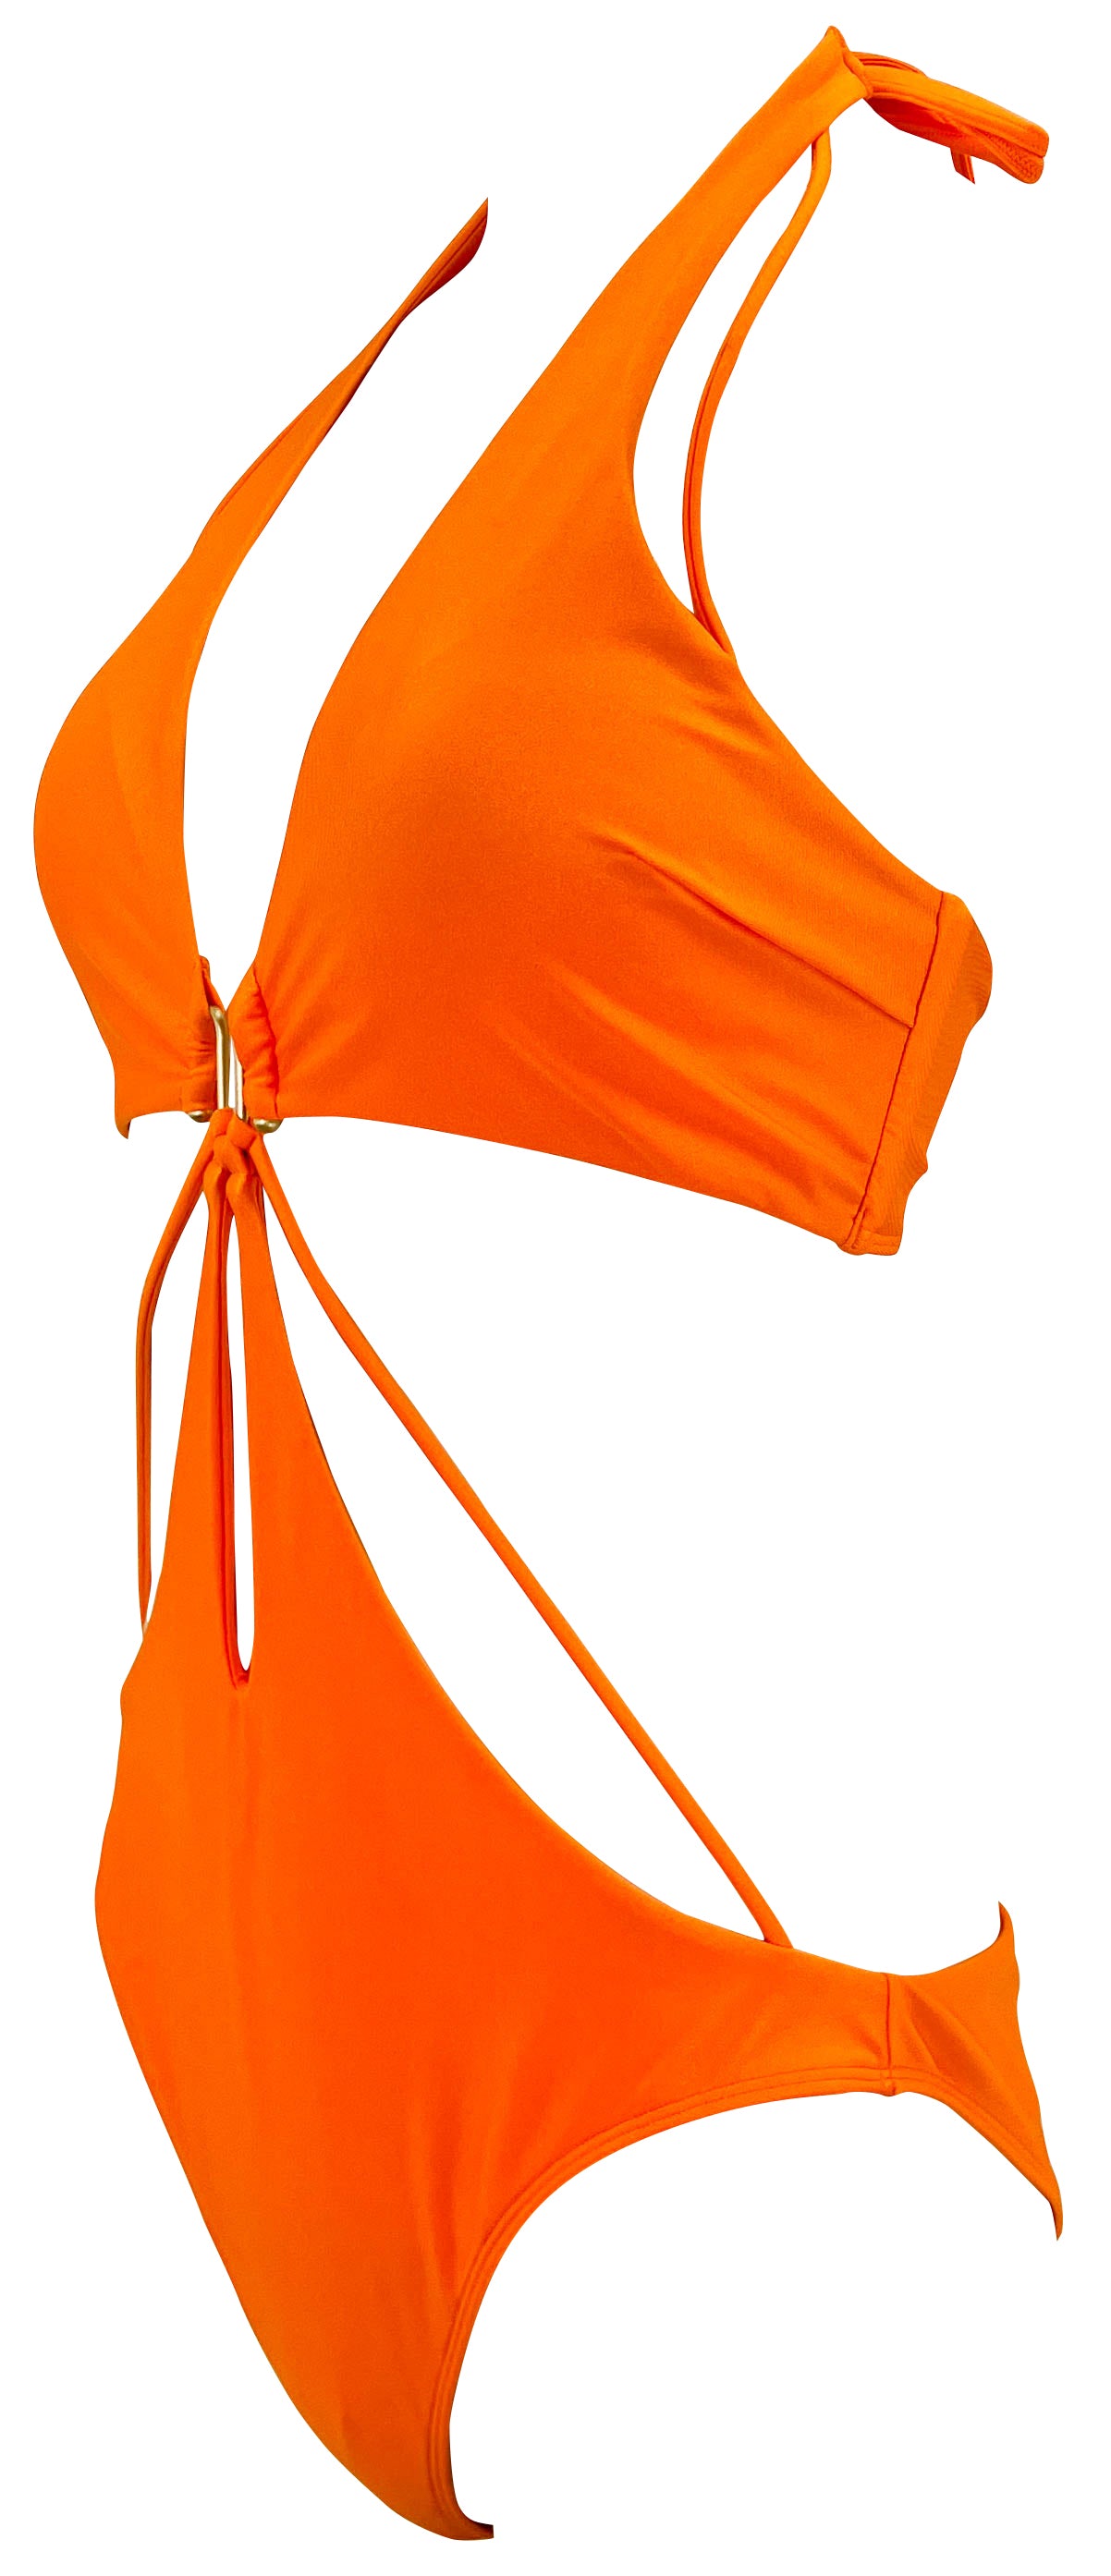 Cult Gaia Knowles Cut-Out Detail Swimsuit in Tangerine Orange - Discounts on Isabel Marant at UAL